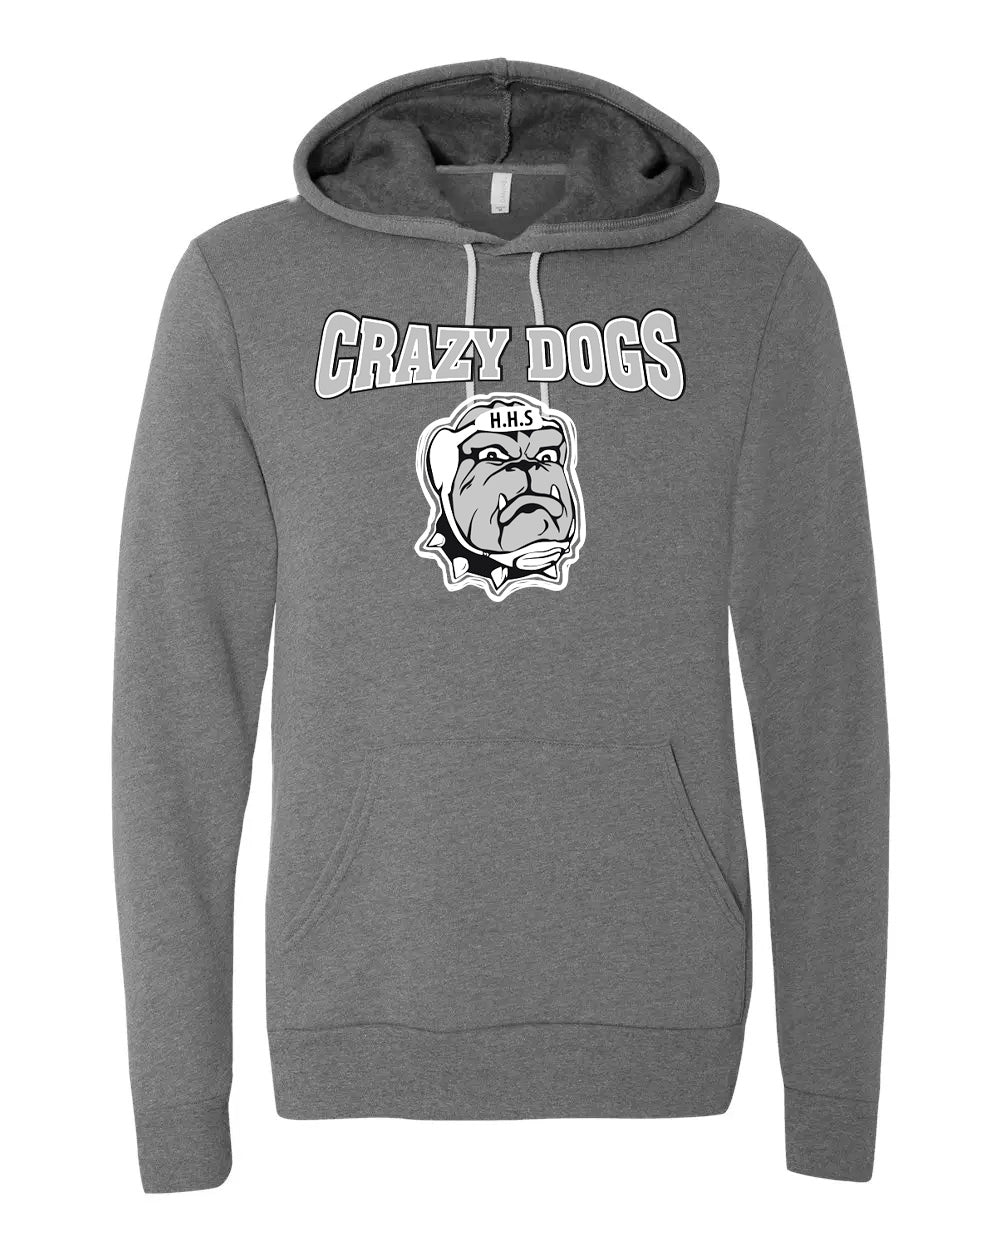 VINTAGE HHS CRAZY DOG Hoodies | Unsettled Apparel